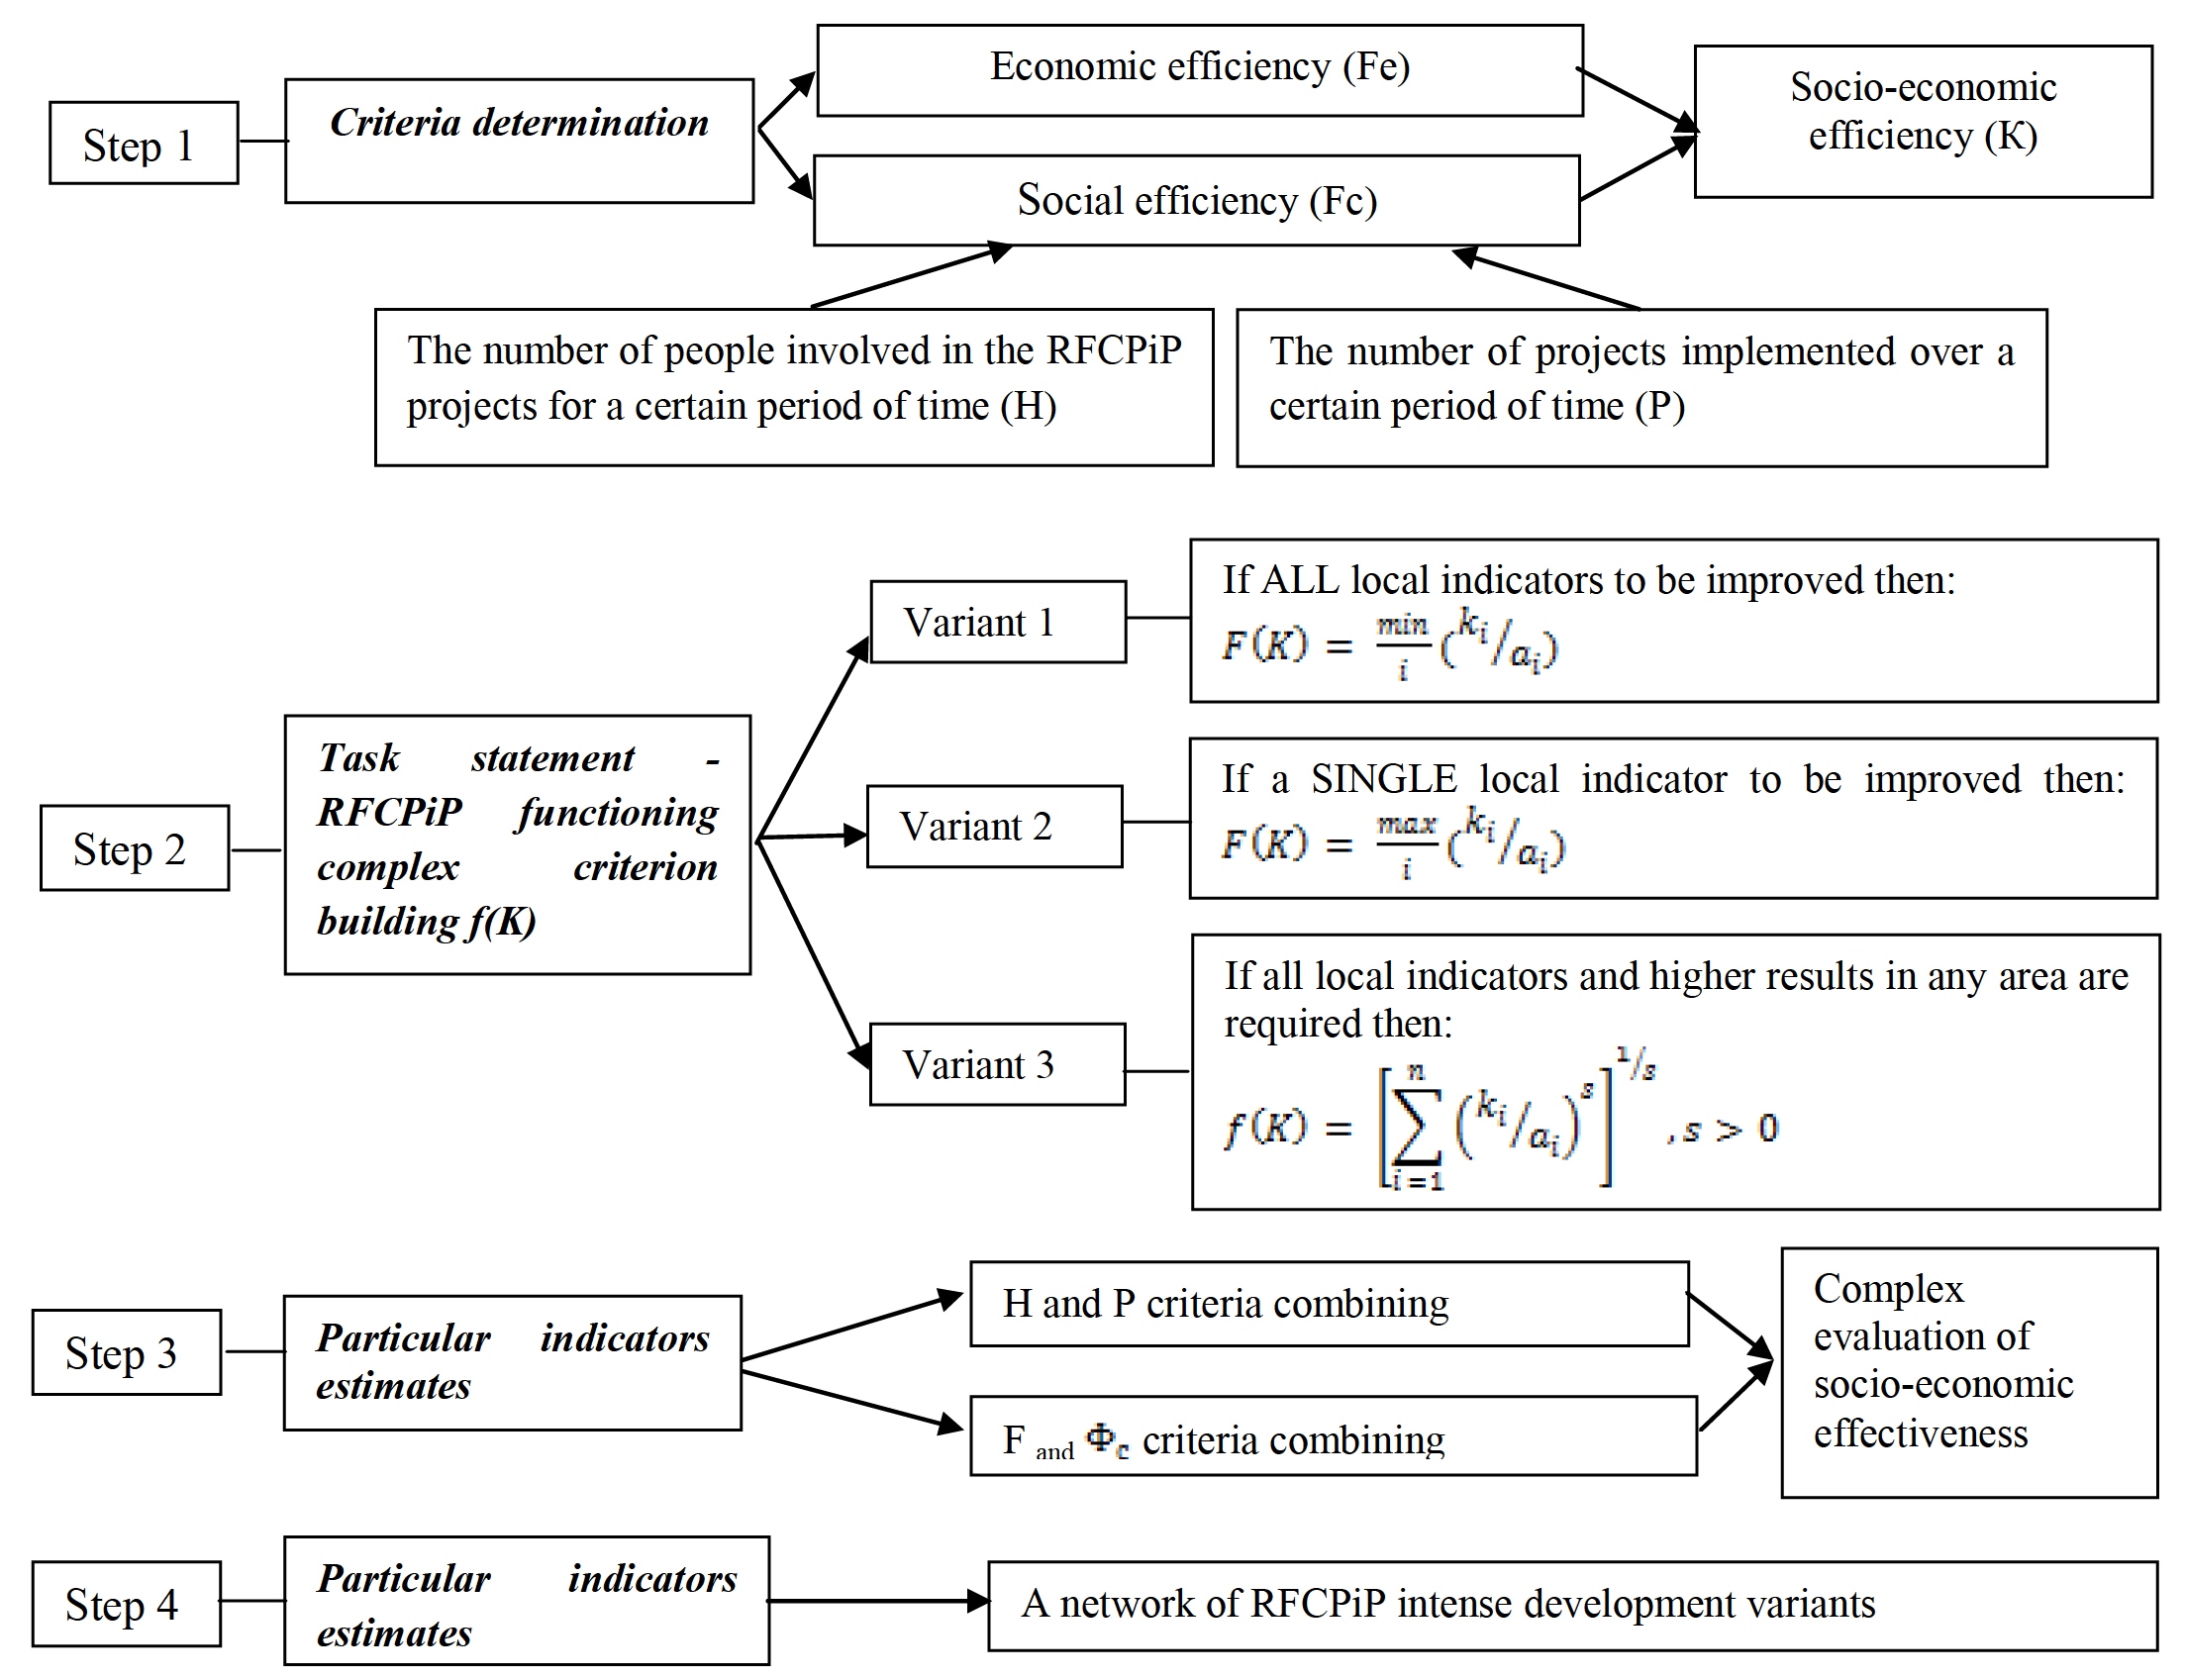 An algorithm of complex evaluation of effective development variants of RFCPiP